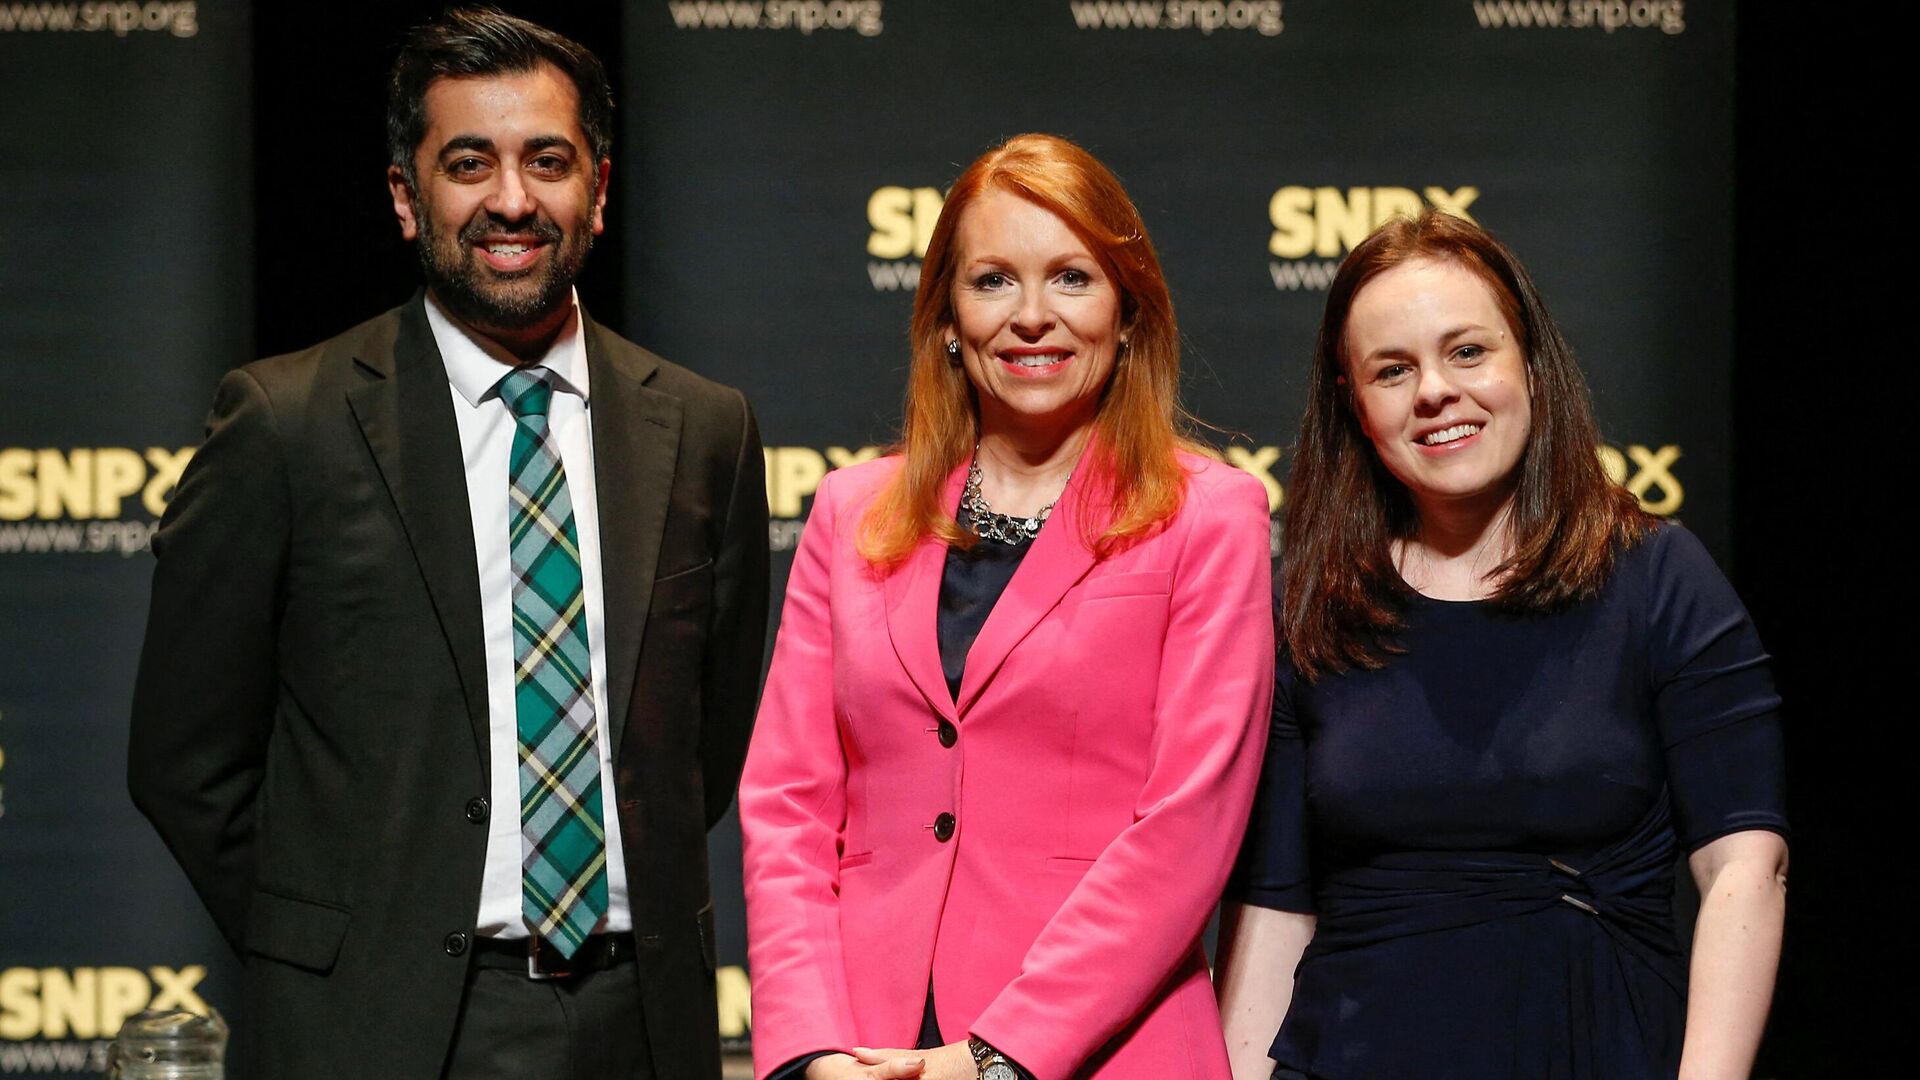 Contenders to become the leader of the Scottish National Party (SNP), and Scotland's First Minister, SNP MSP Ash Regan (C), Scotland's Finance Minister and SNP MSP Kate Forbes (R), and Scotland's Health Minister and SNP MSP Humza Yousaf pose for a photograph at a SNP leadership hustings in Aberdeen on March 12, 2023. - Sputnik International, 1920, 27.03.2023